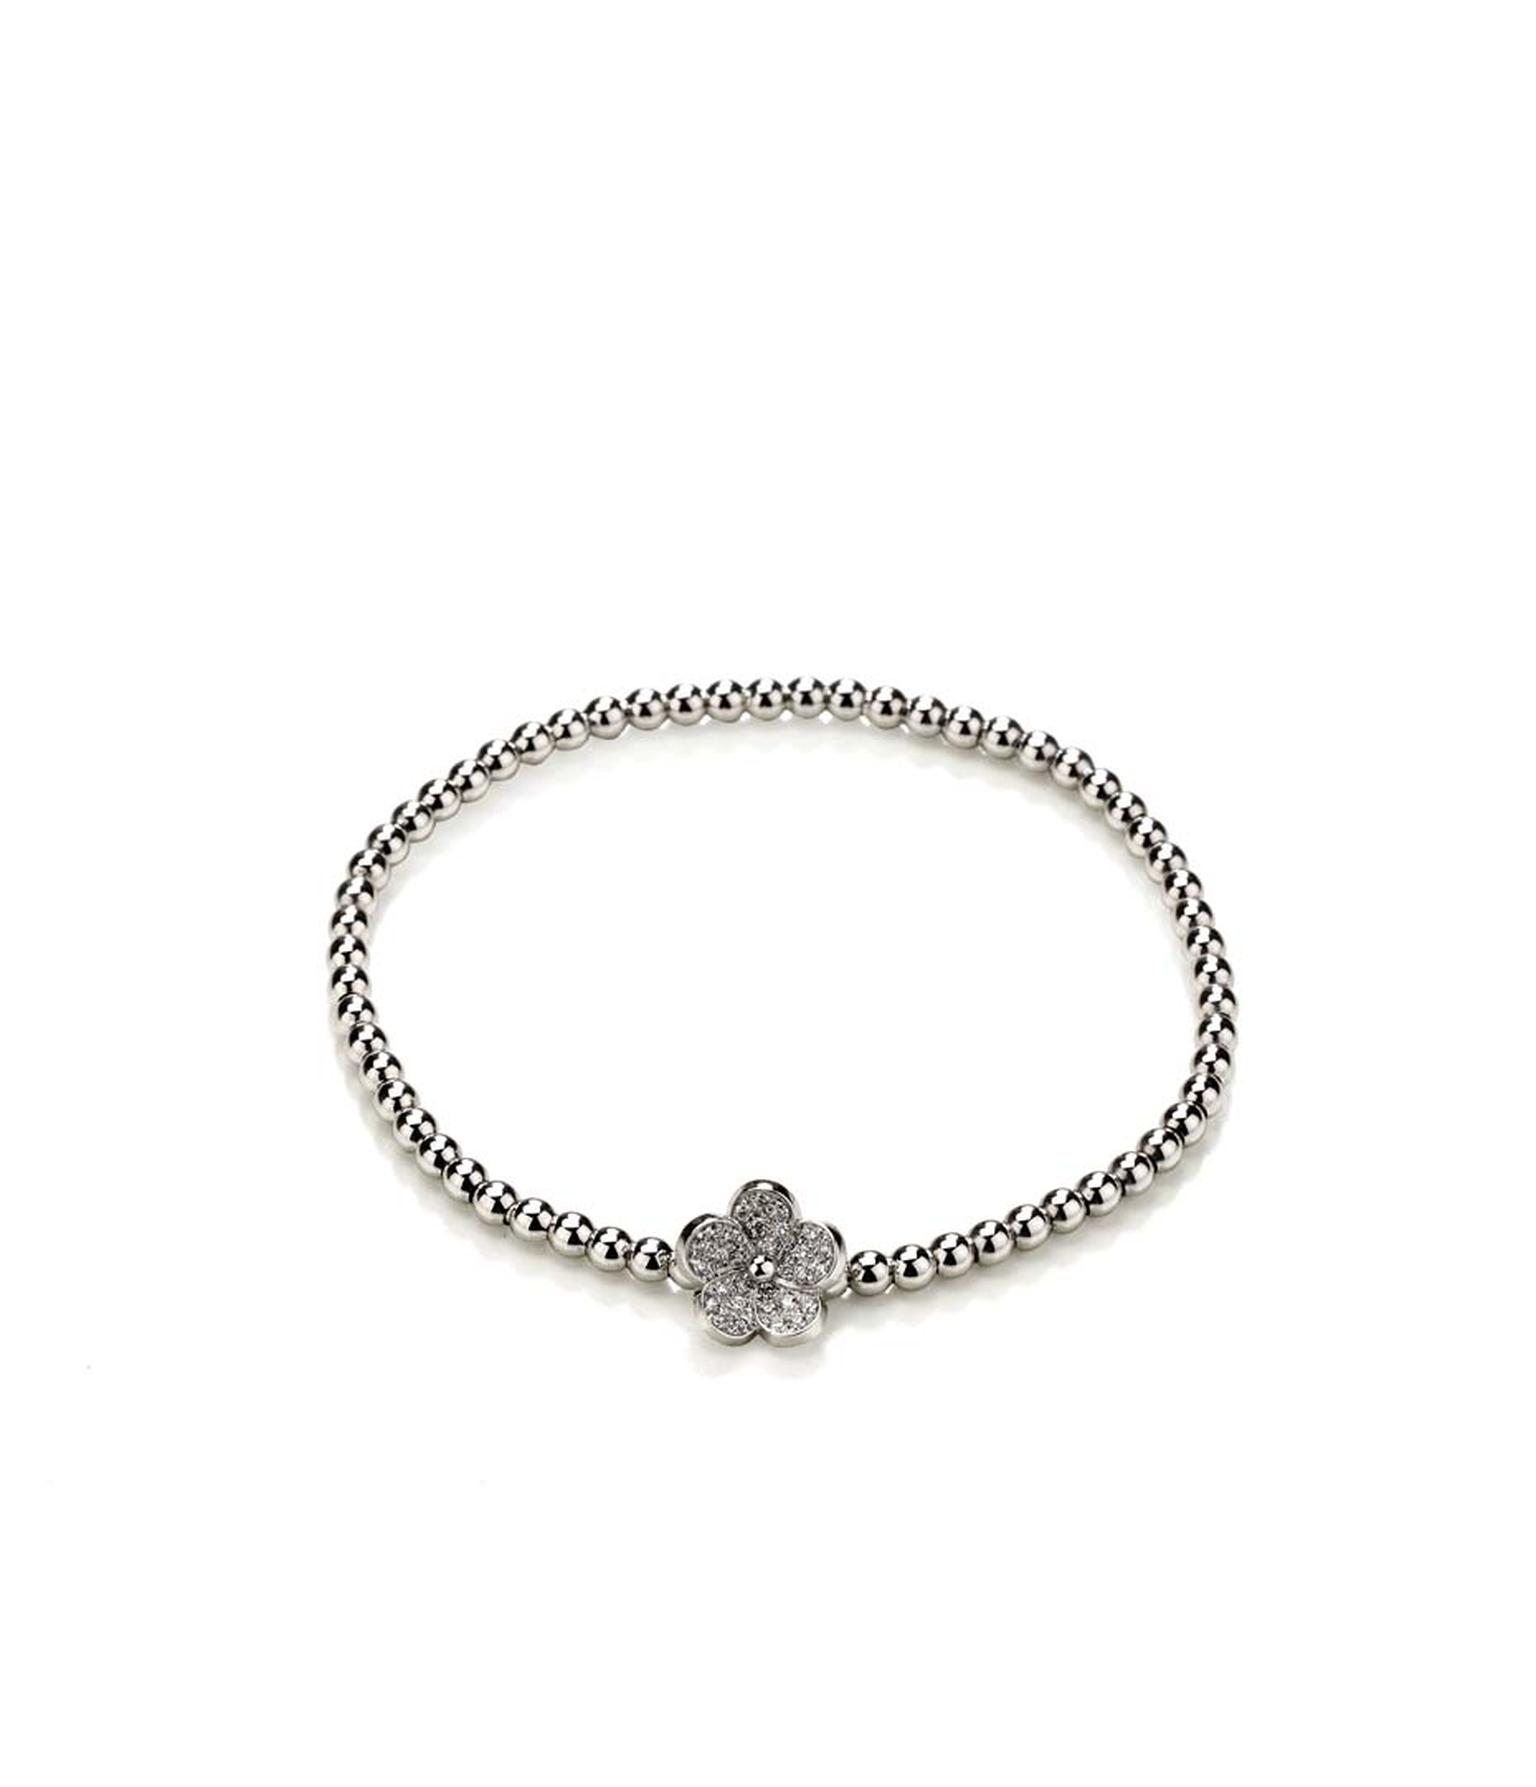 Meissen Blossom collection beaded bracelet in white gold with a flower filled with pavé diamonds.